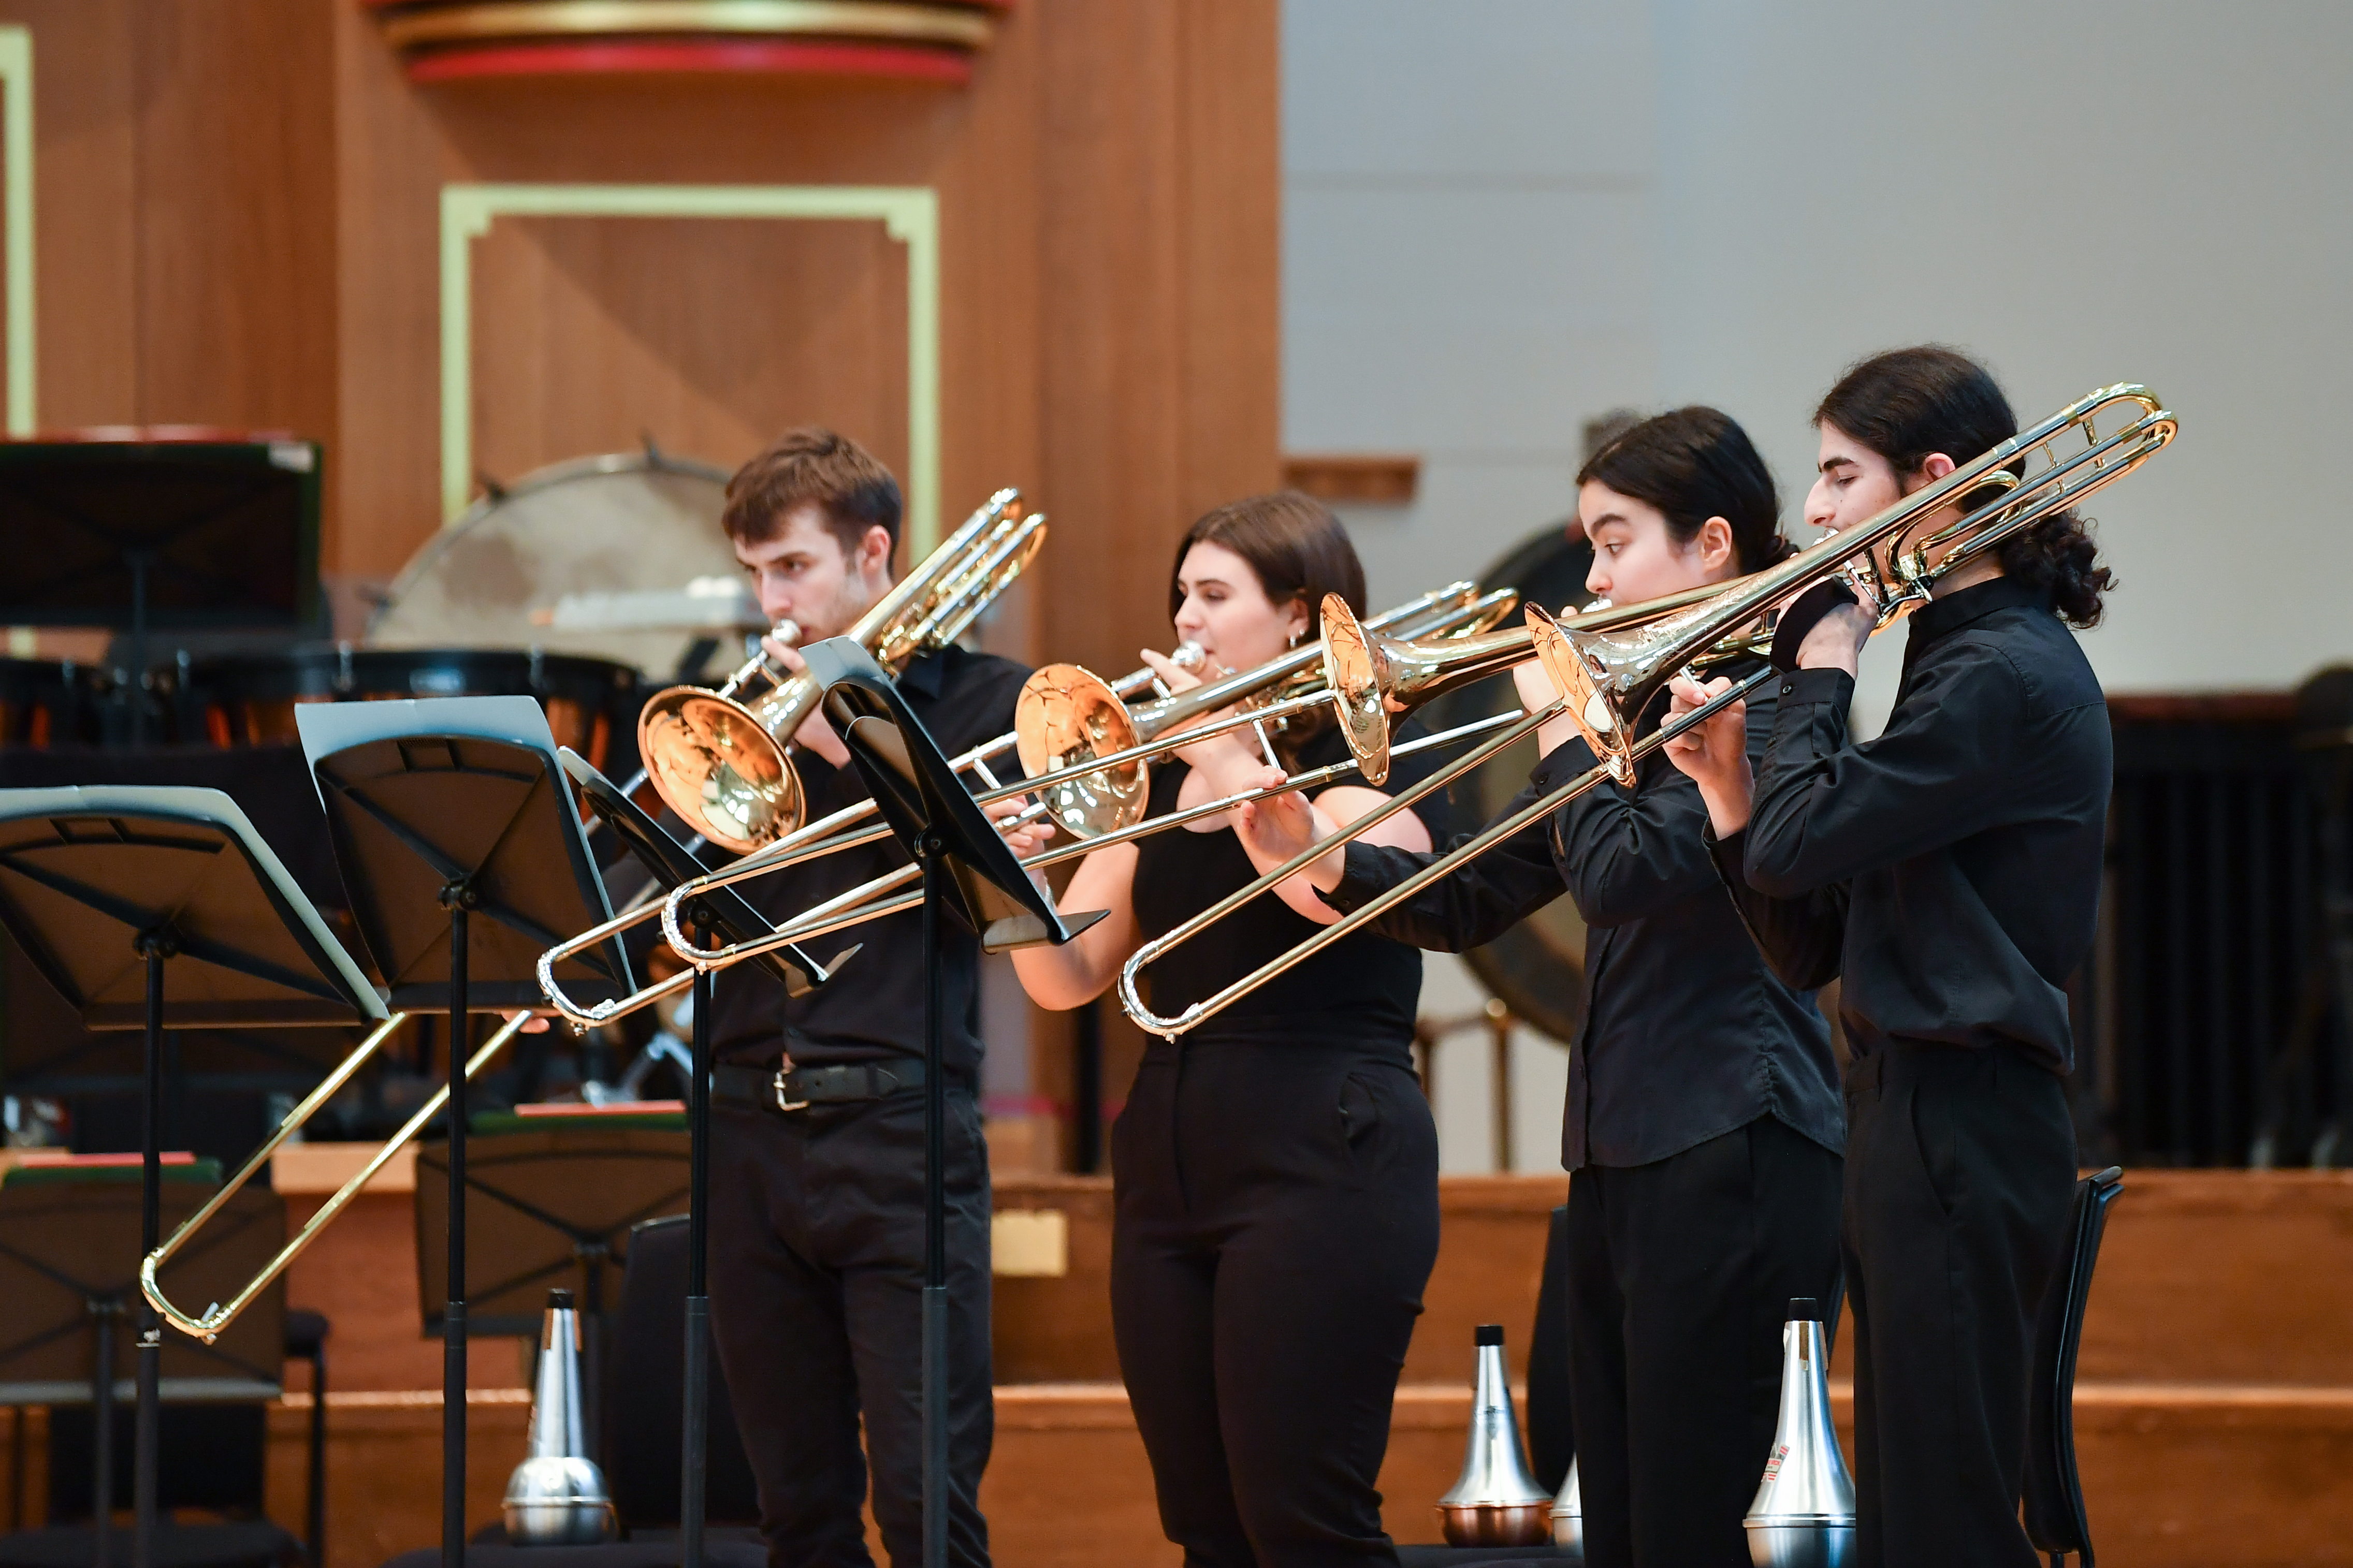 Four trombone players from the Junior Department performing in the Concert Hall